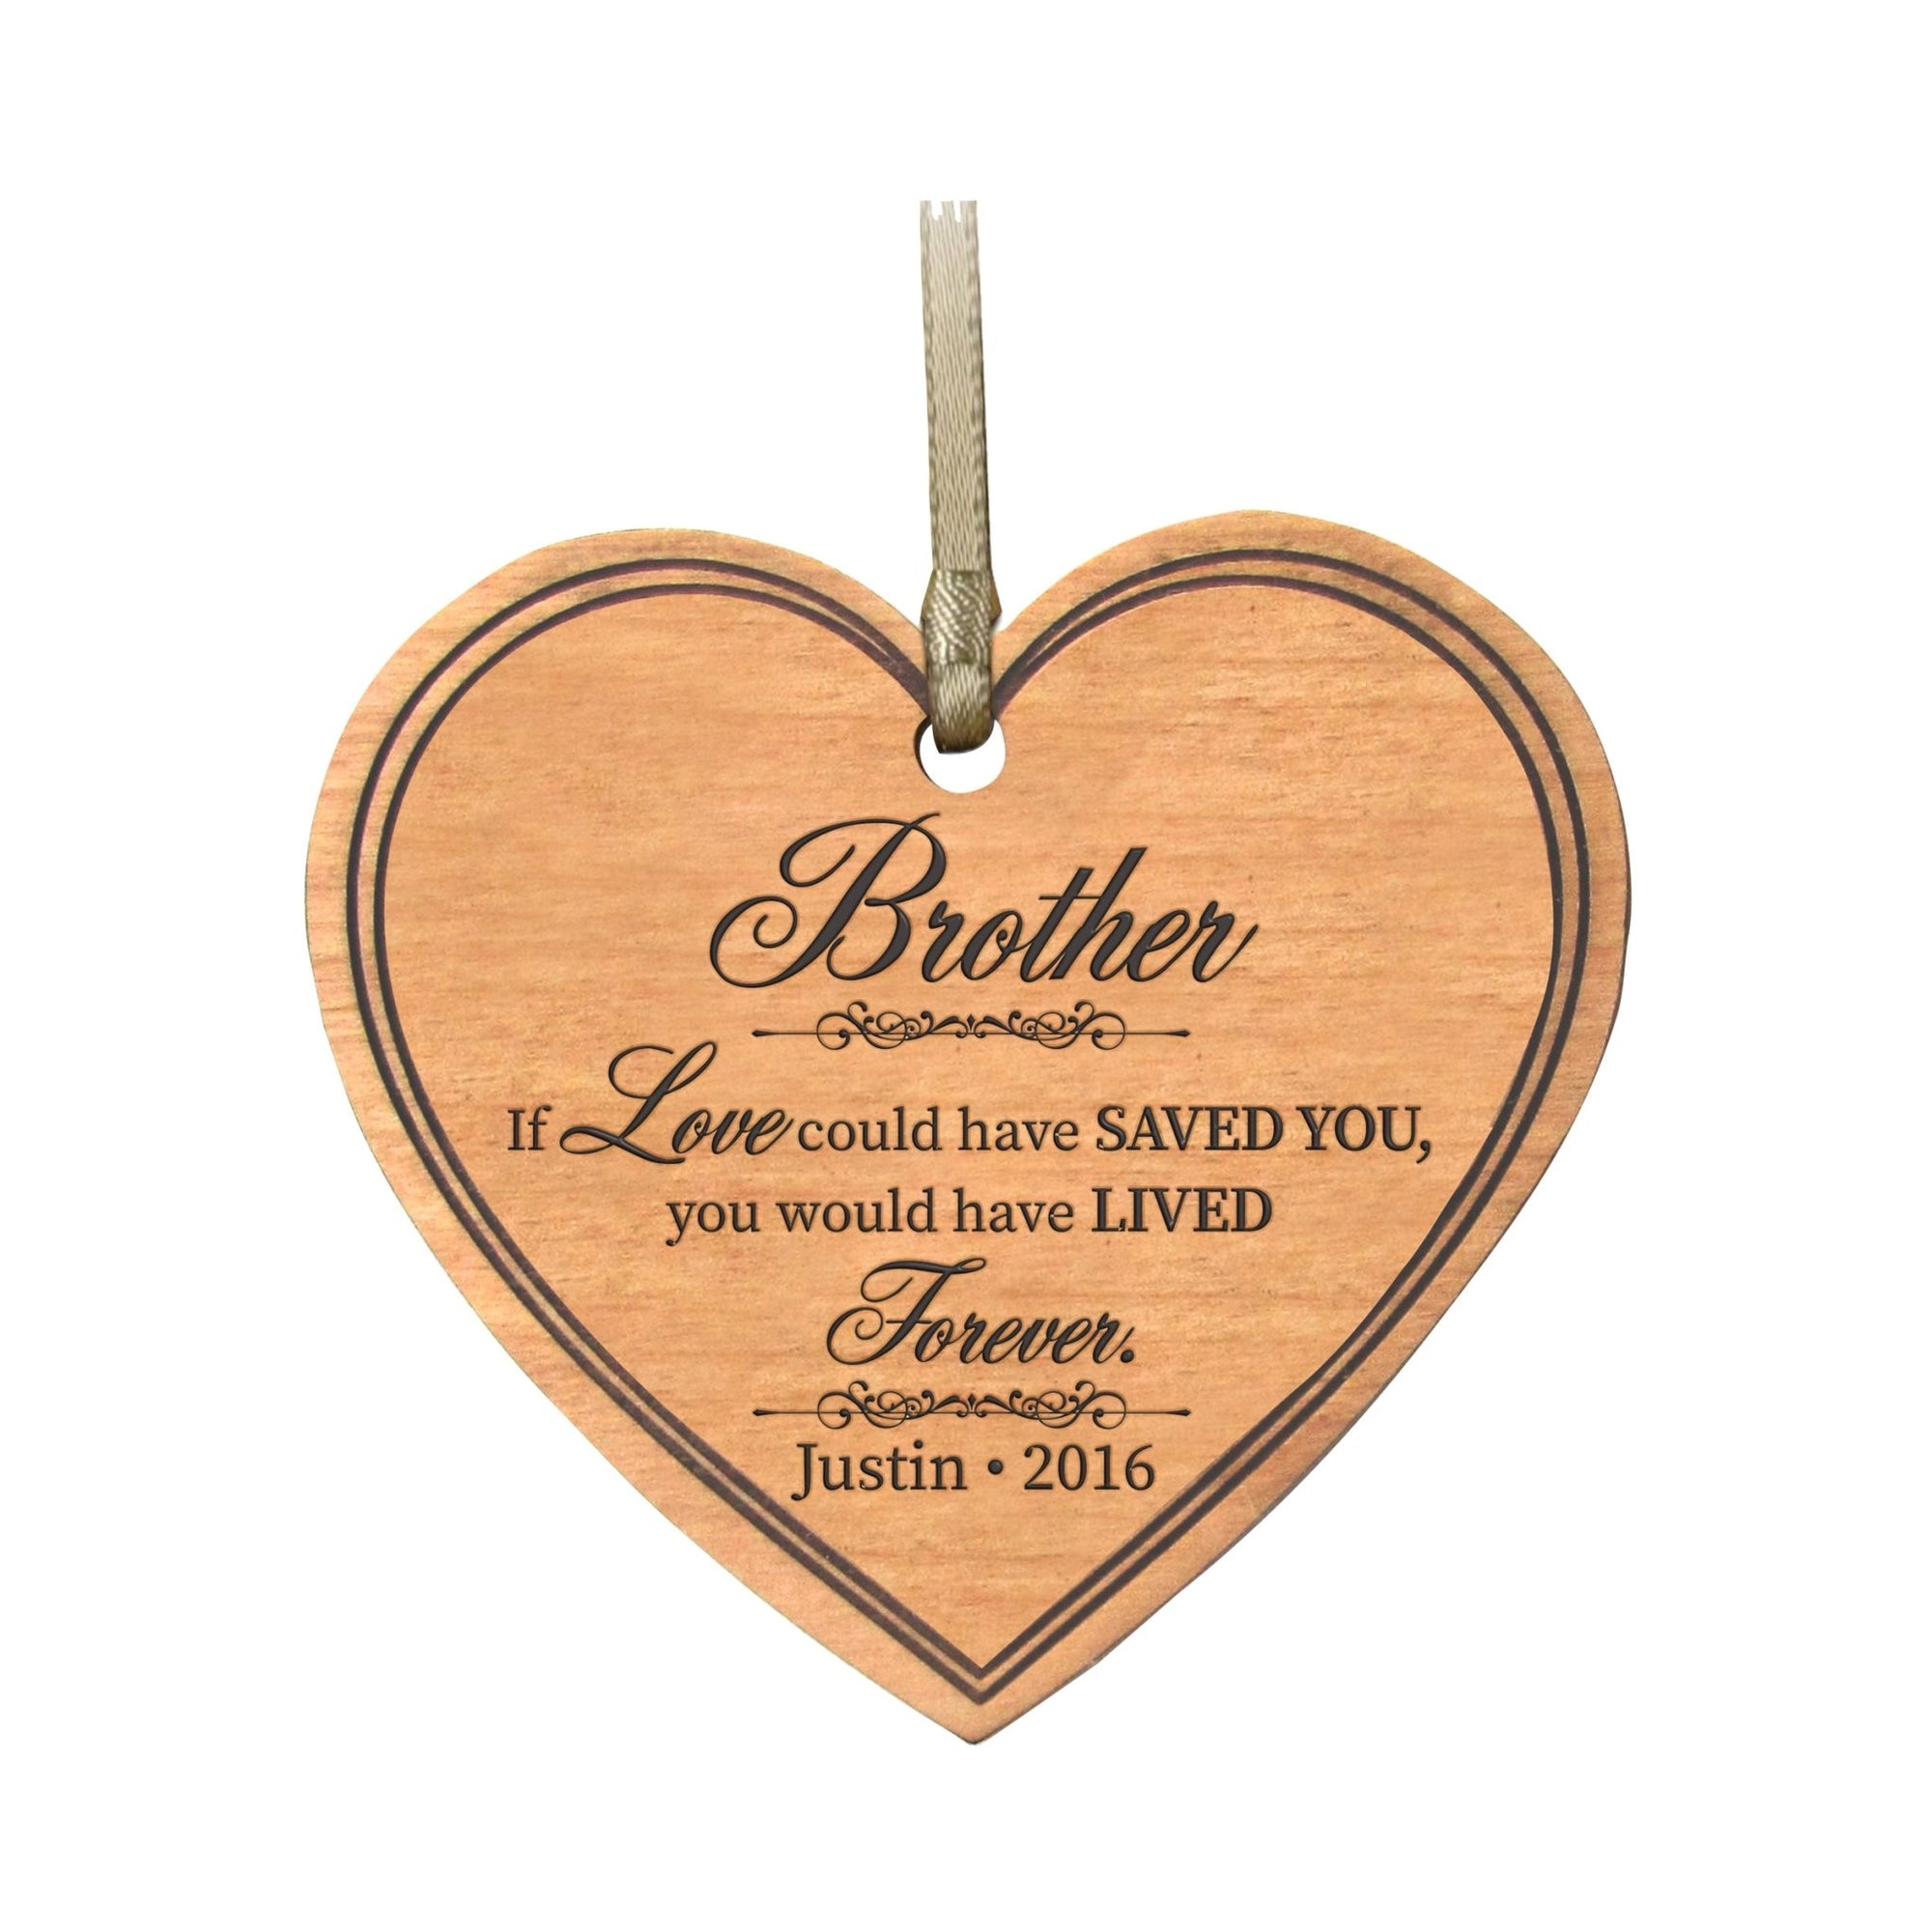 Personalized Engraved Heart Memorial Ornament - If Love Could - LifeSong Milestones